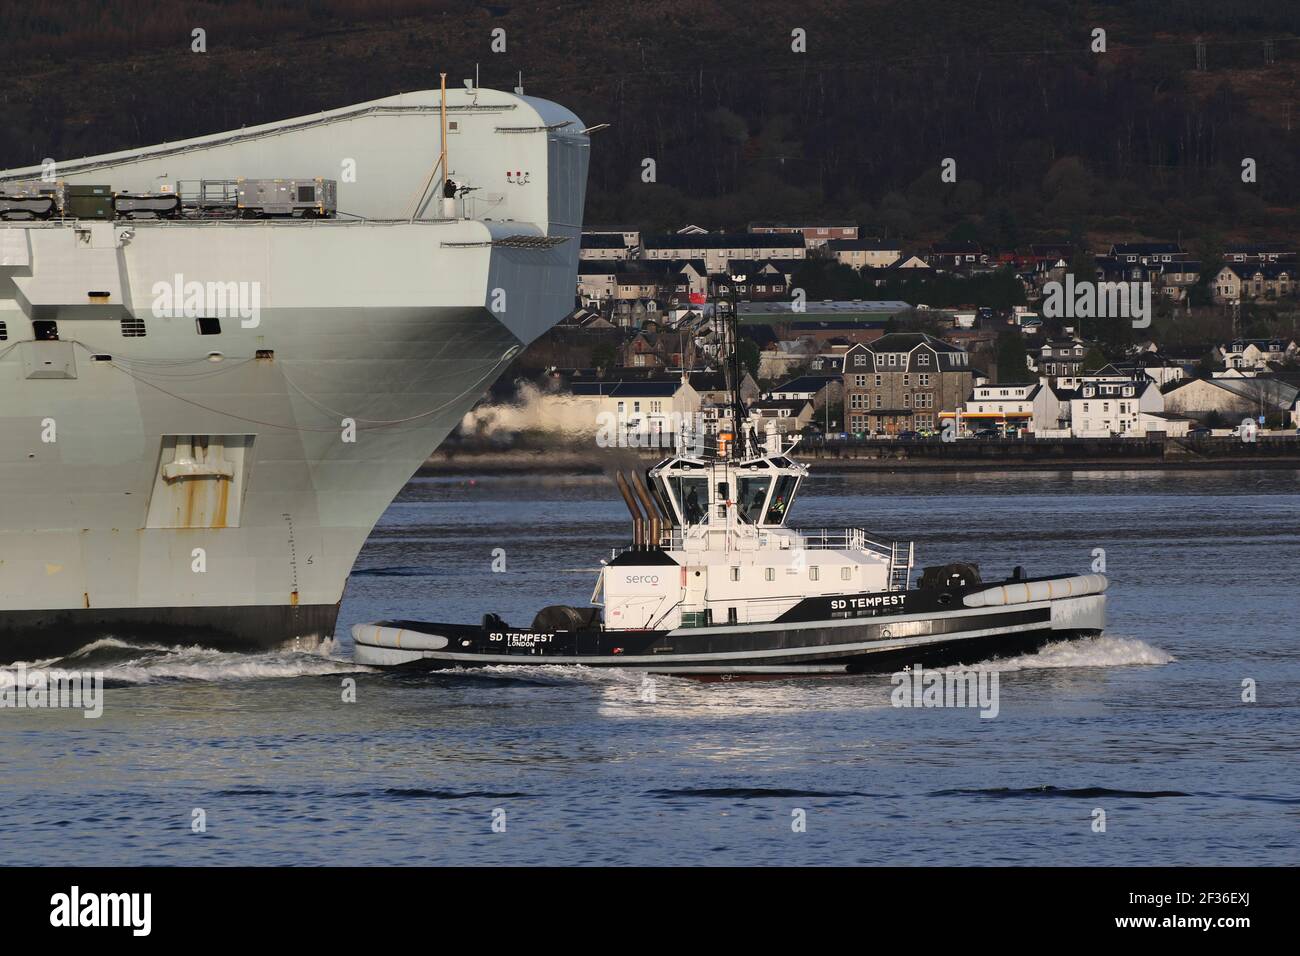 SD Tempest, a Damen ART 8032 tug boat operated by Serco Marine Services, is seen here escorting the Royal Navy aircraft carrier HMS Queen Elizabeth (R08) on the carrier's first visit to the Firth of Clyde. Stock Photo